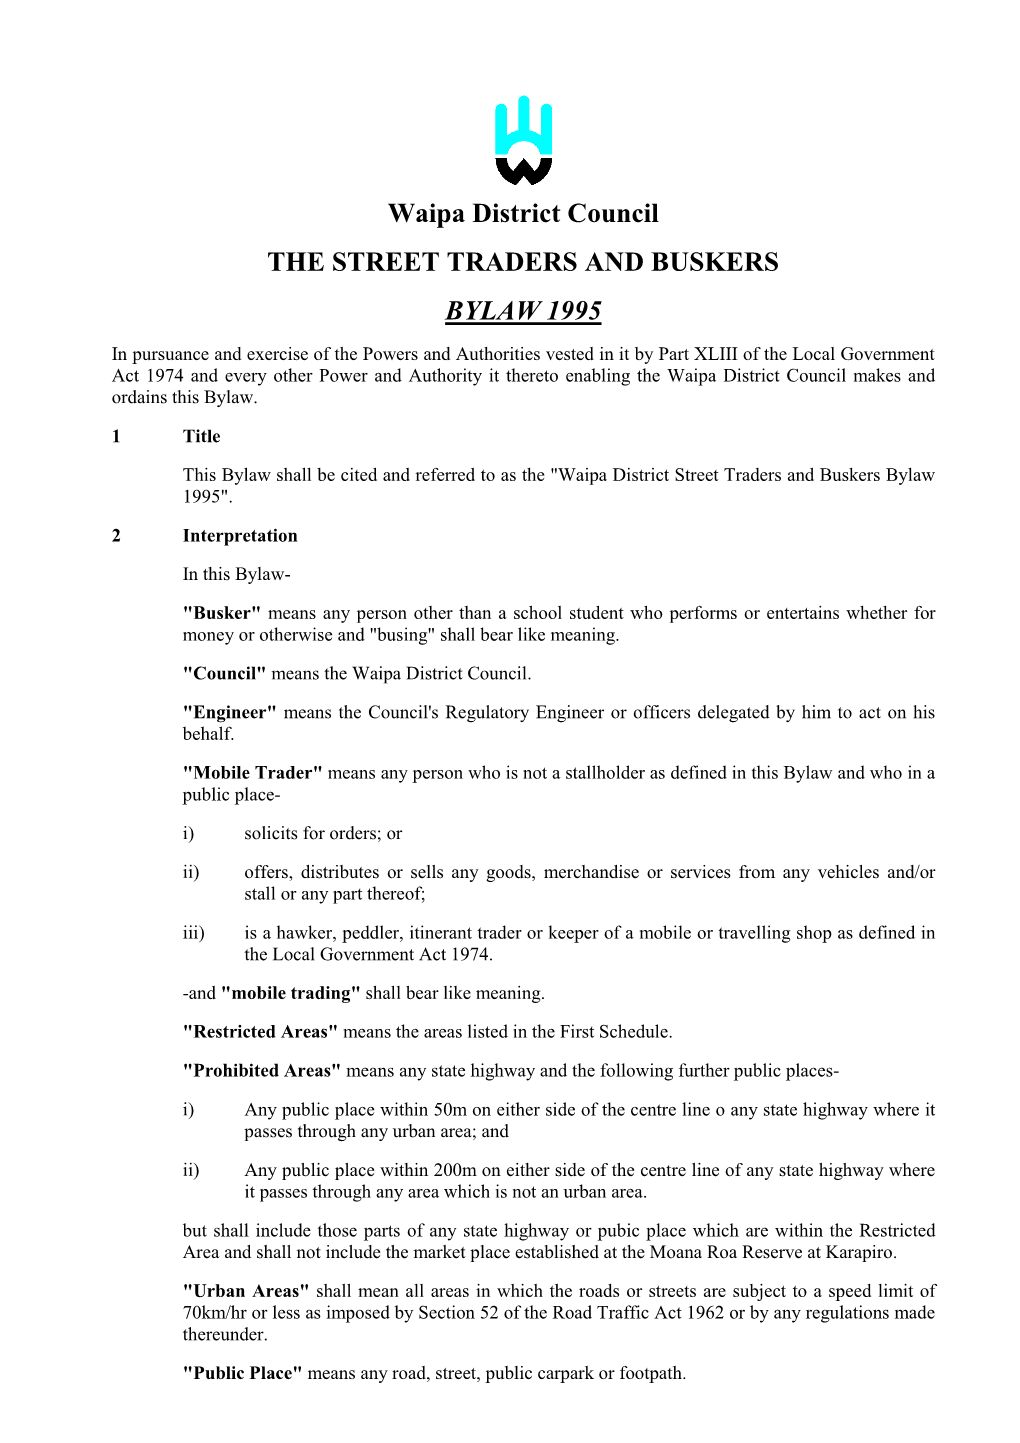 Waipa District Council Street Traders and Buskers By-Law, 1995